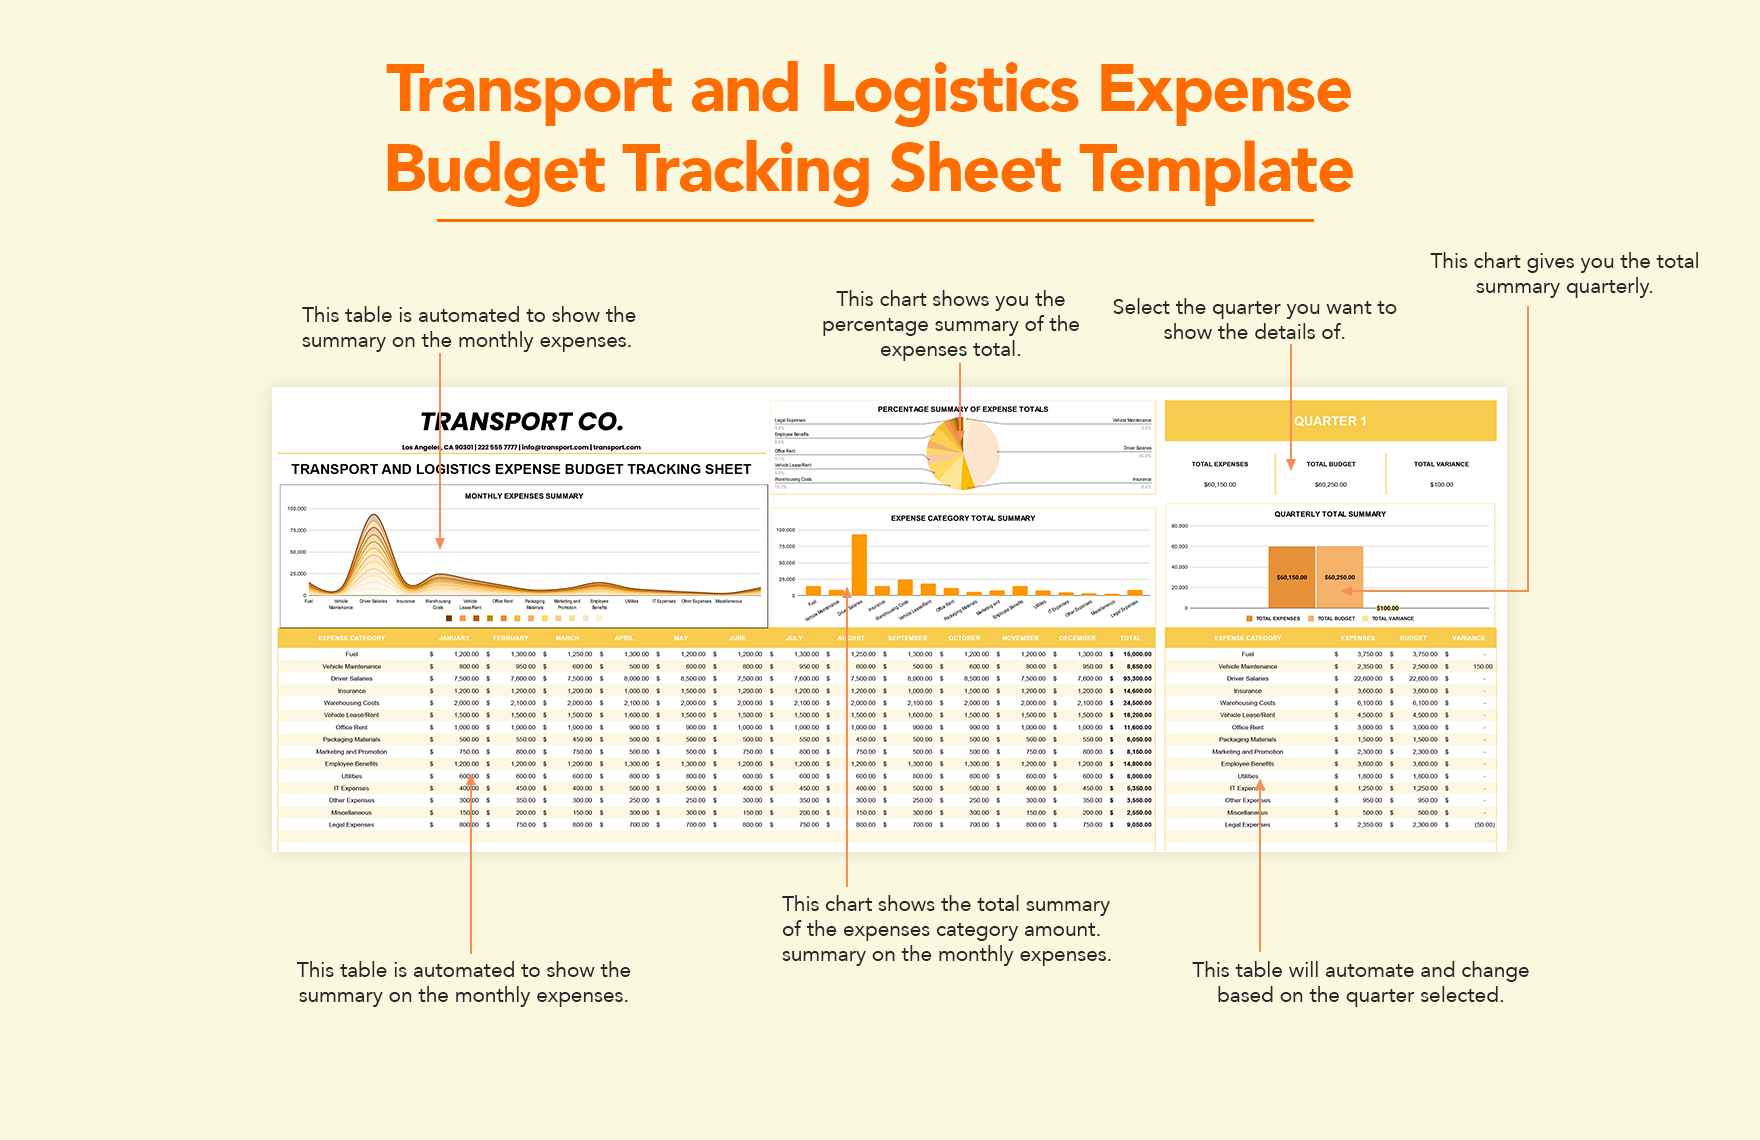 Transport and Logistics Expense Budget Tracking Sheet Template